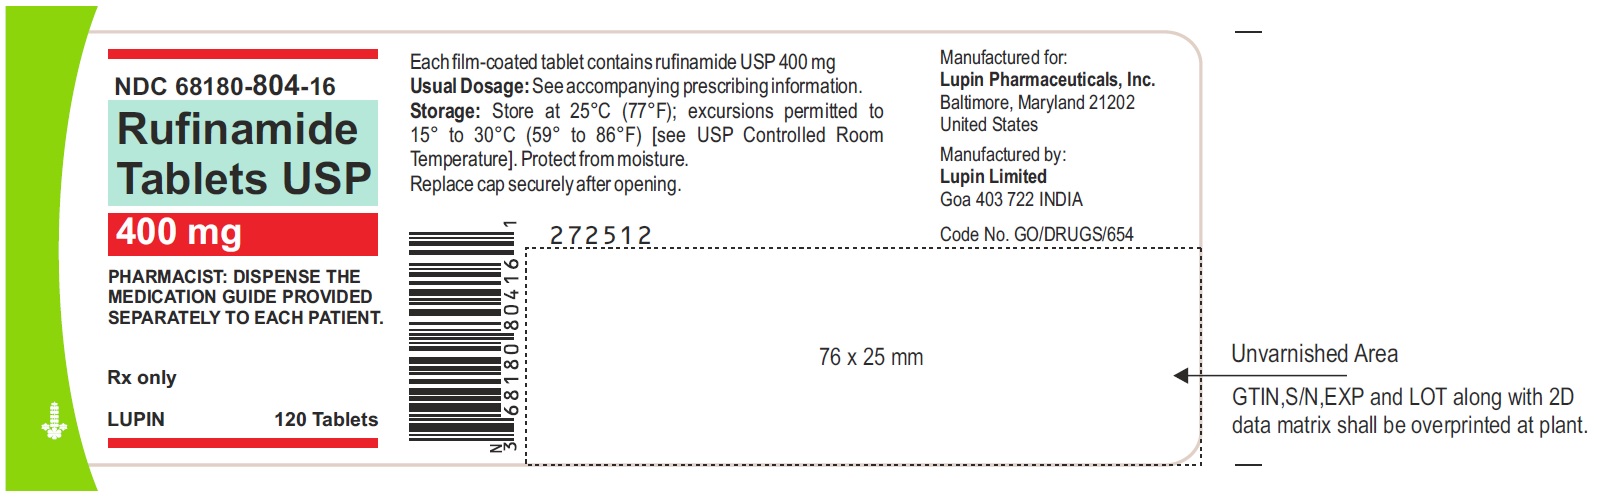 NDC: <a href=/NDC/68180-804-16>68180-804-16</a>
Container Label of 120 Tablets